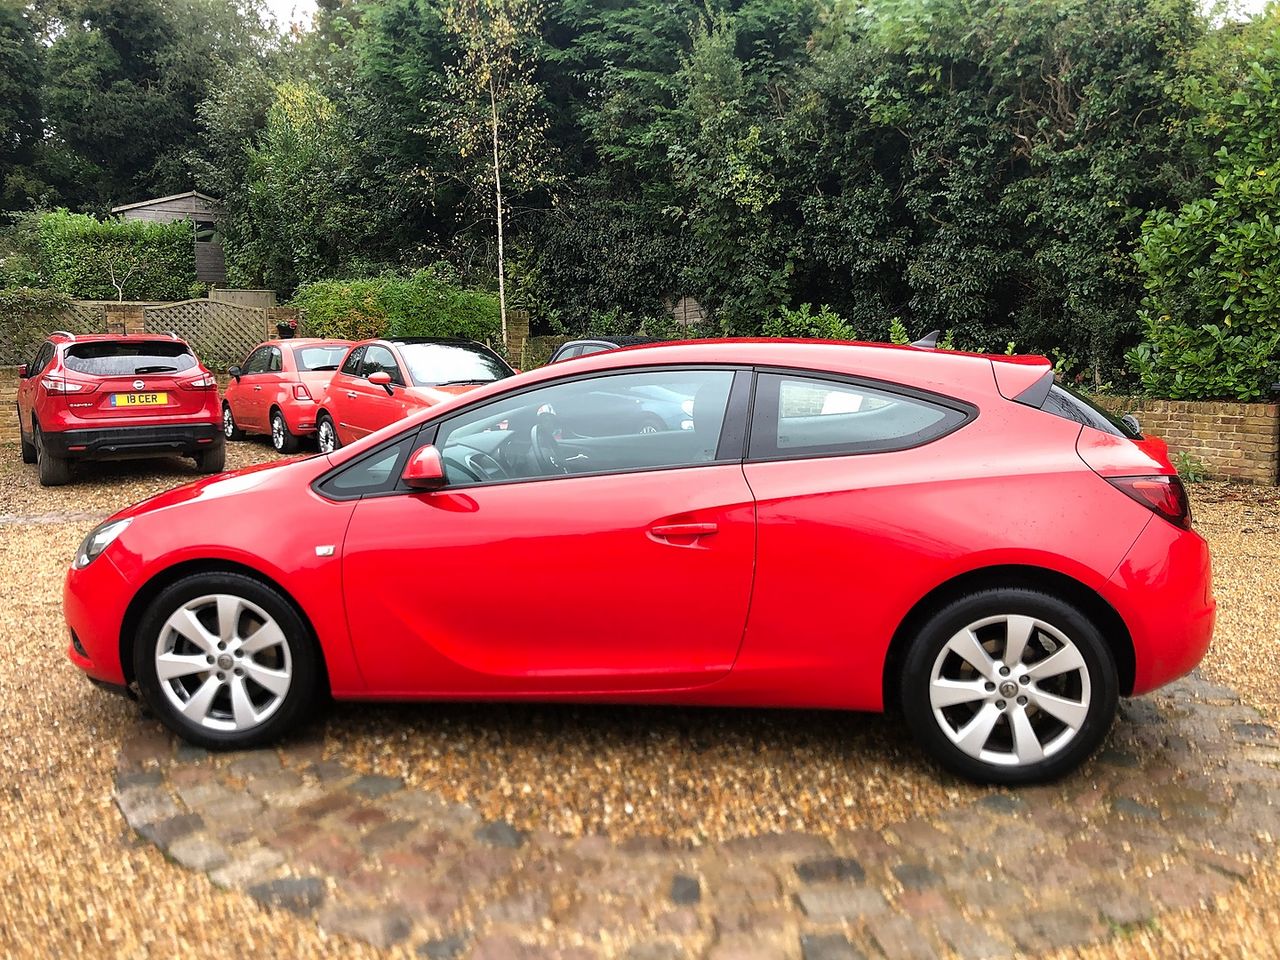 2014 VAUXHALL Astra GTC SPORT 1.4 16v Turbo 140PS auto - Picture 5 of 13